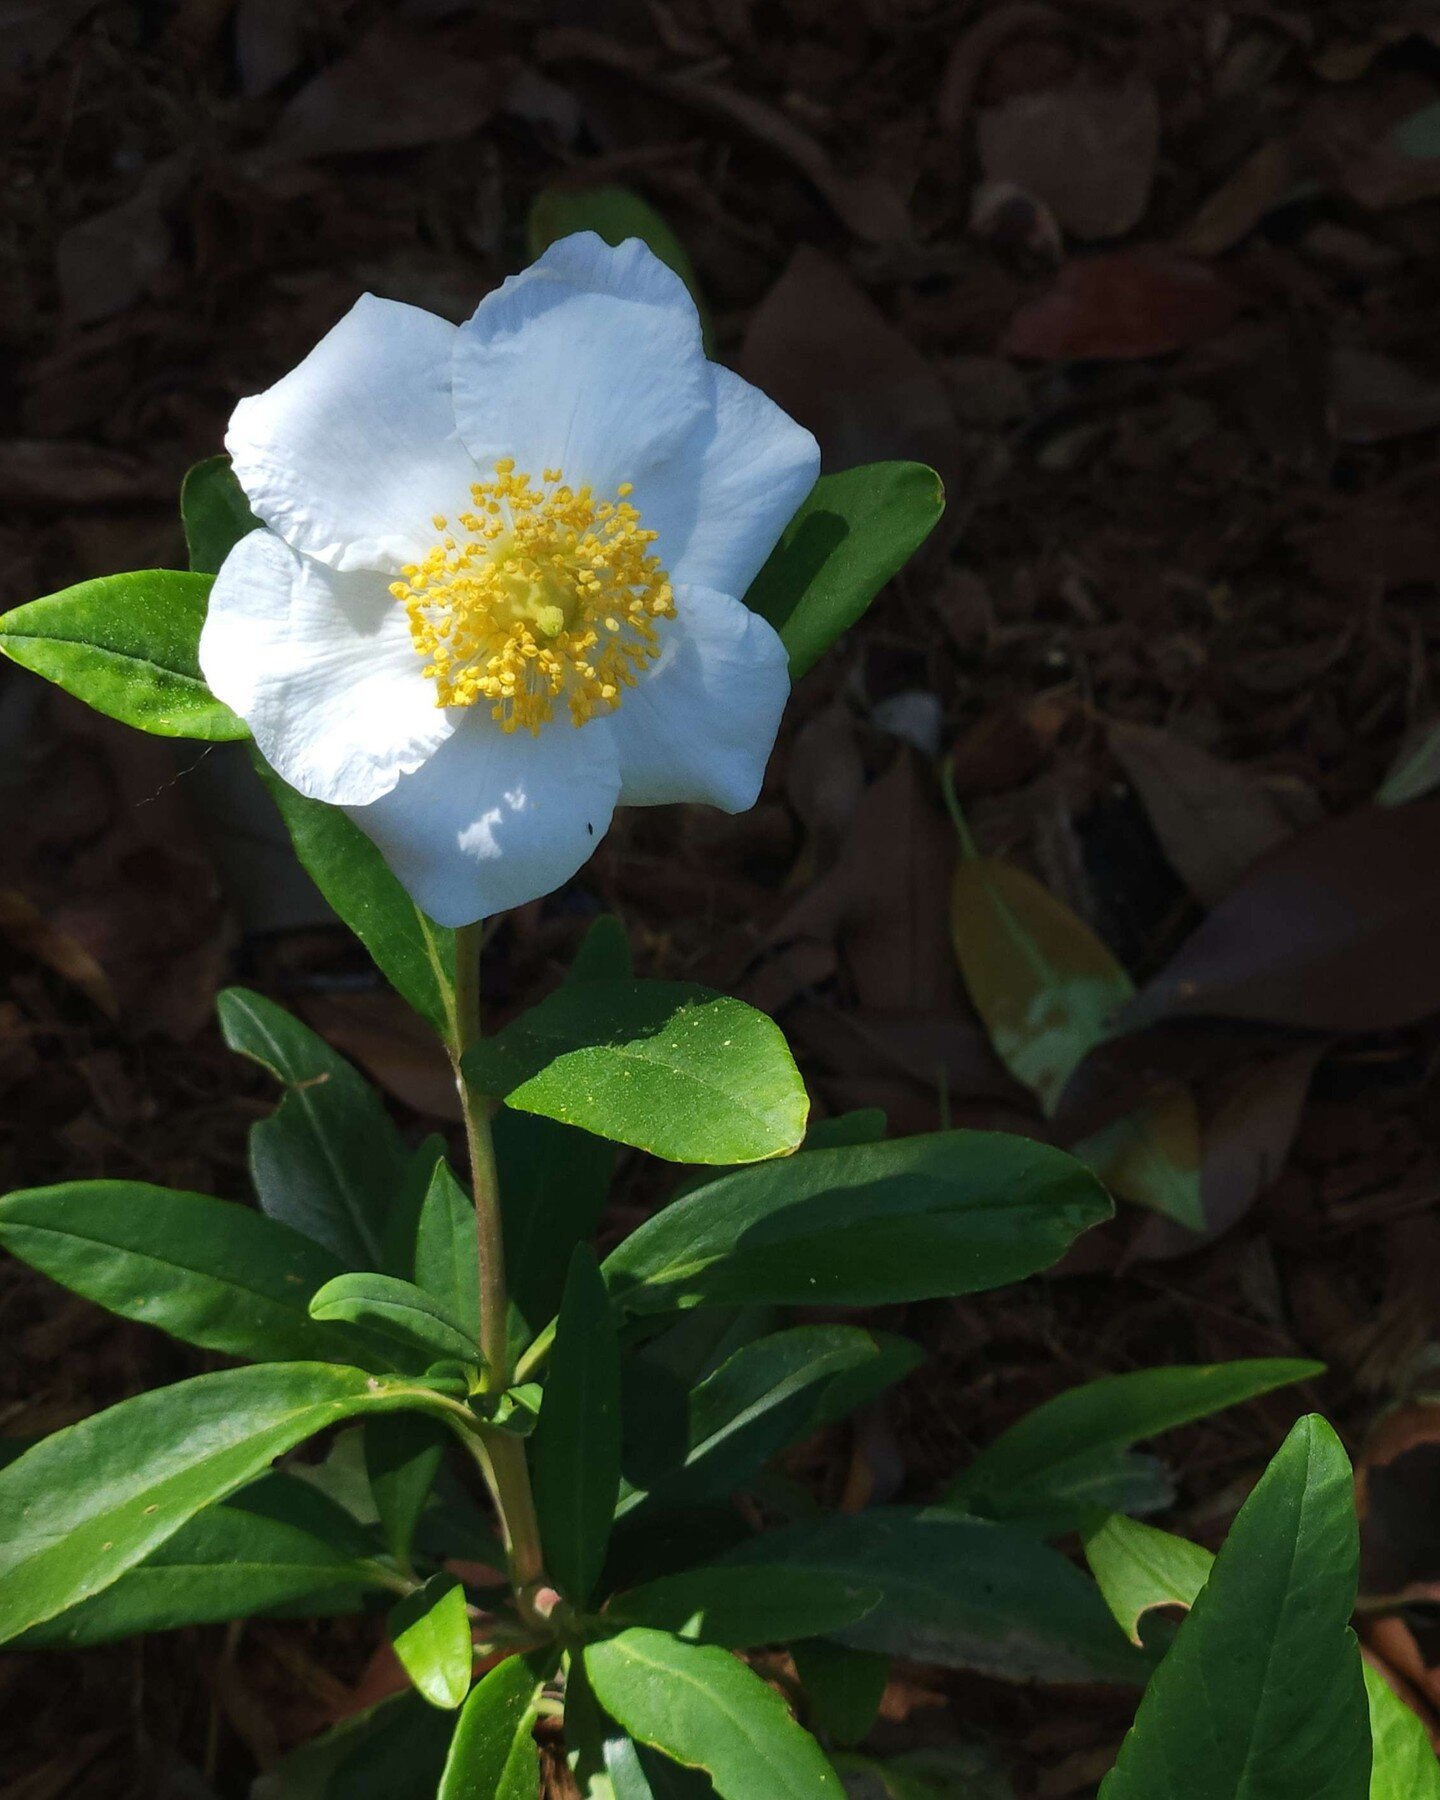 Bush Anemone (Carpenteria californica)

An evergreen shrub, the bush anemone is a rare native treasure. It is only found in the lower Sierras east of Fresno and reproduces primarily through root suckers.

Enjoys a sunny spot with good drainage, and l